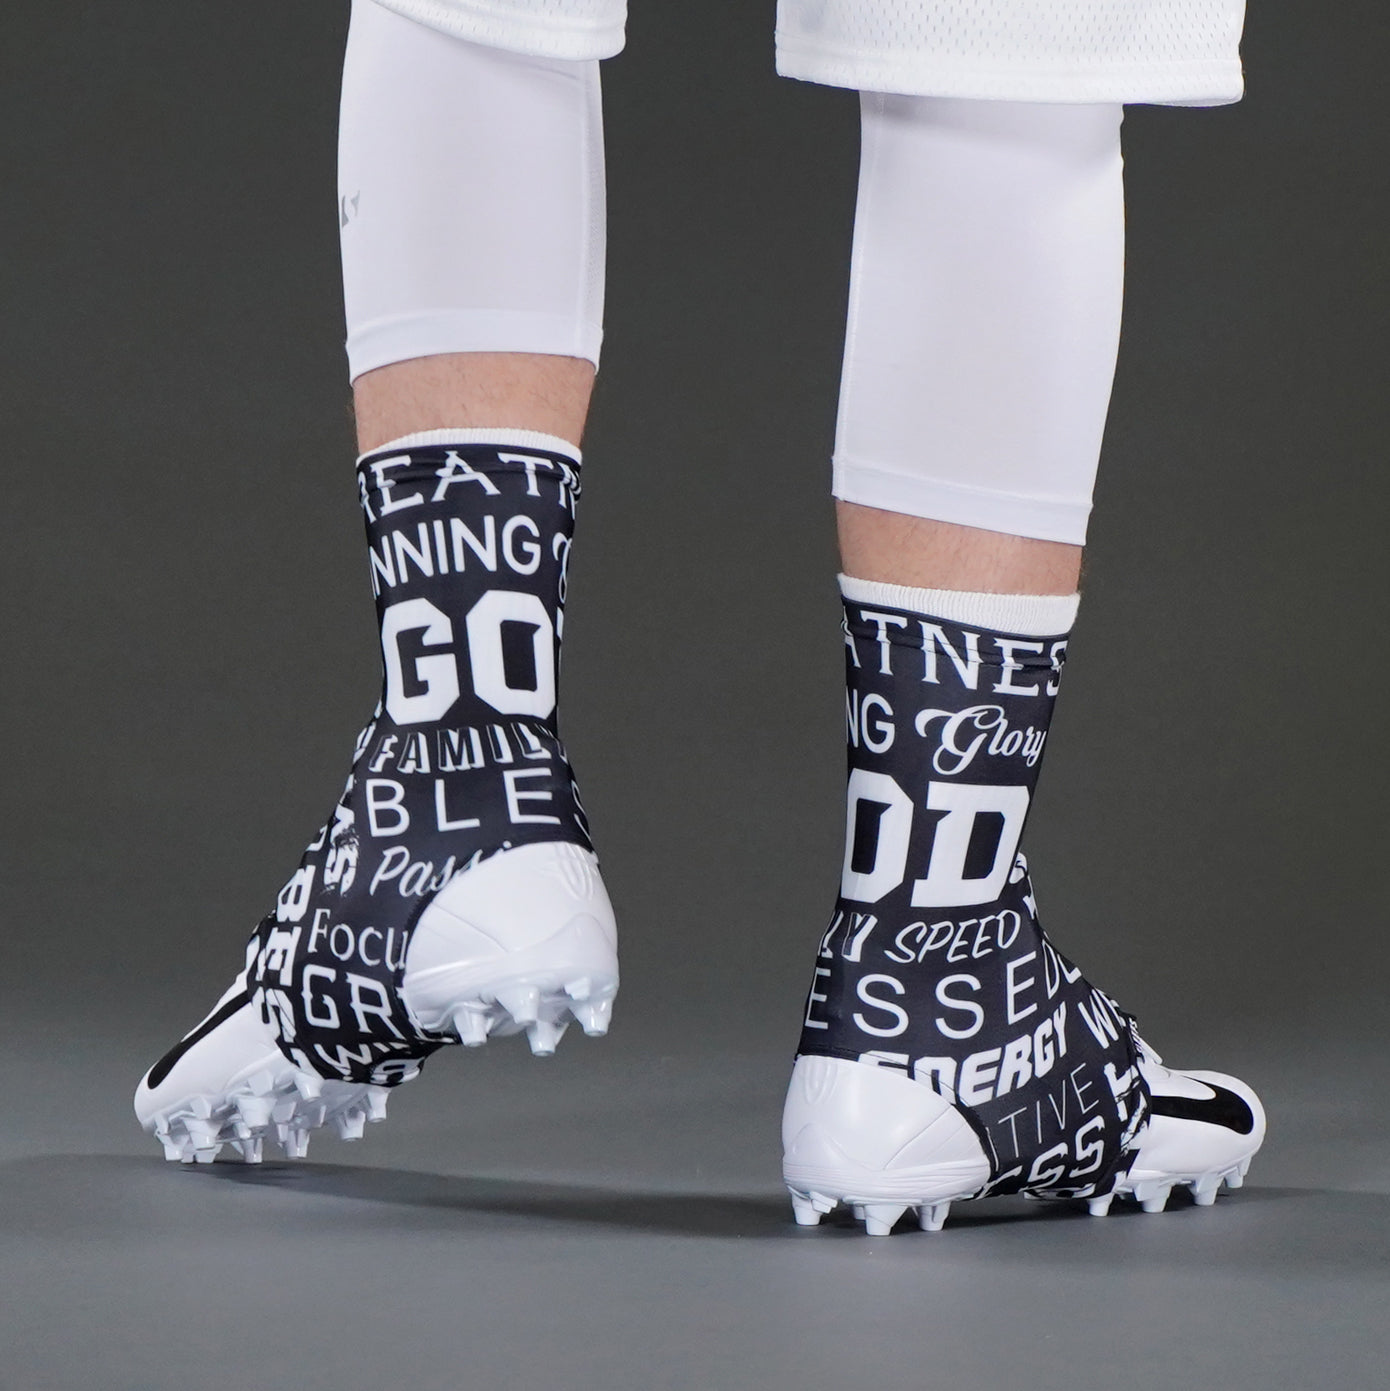 Inspirational Black Spats / Cleat Covers